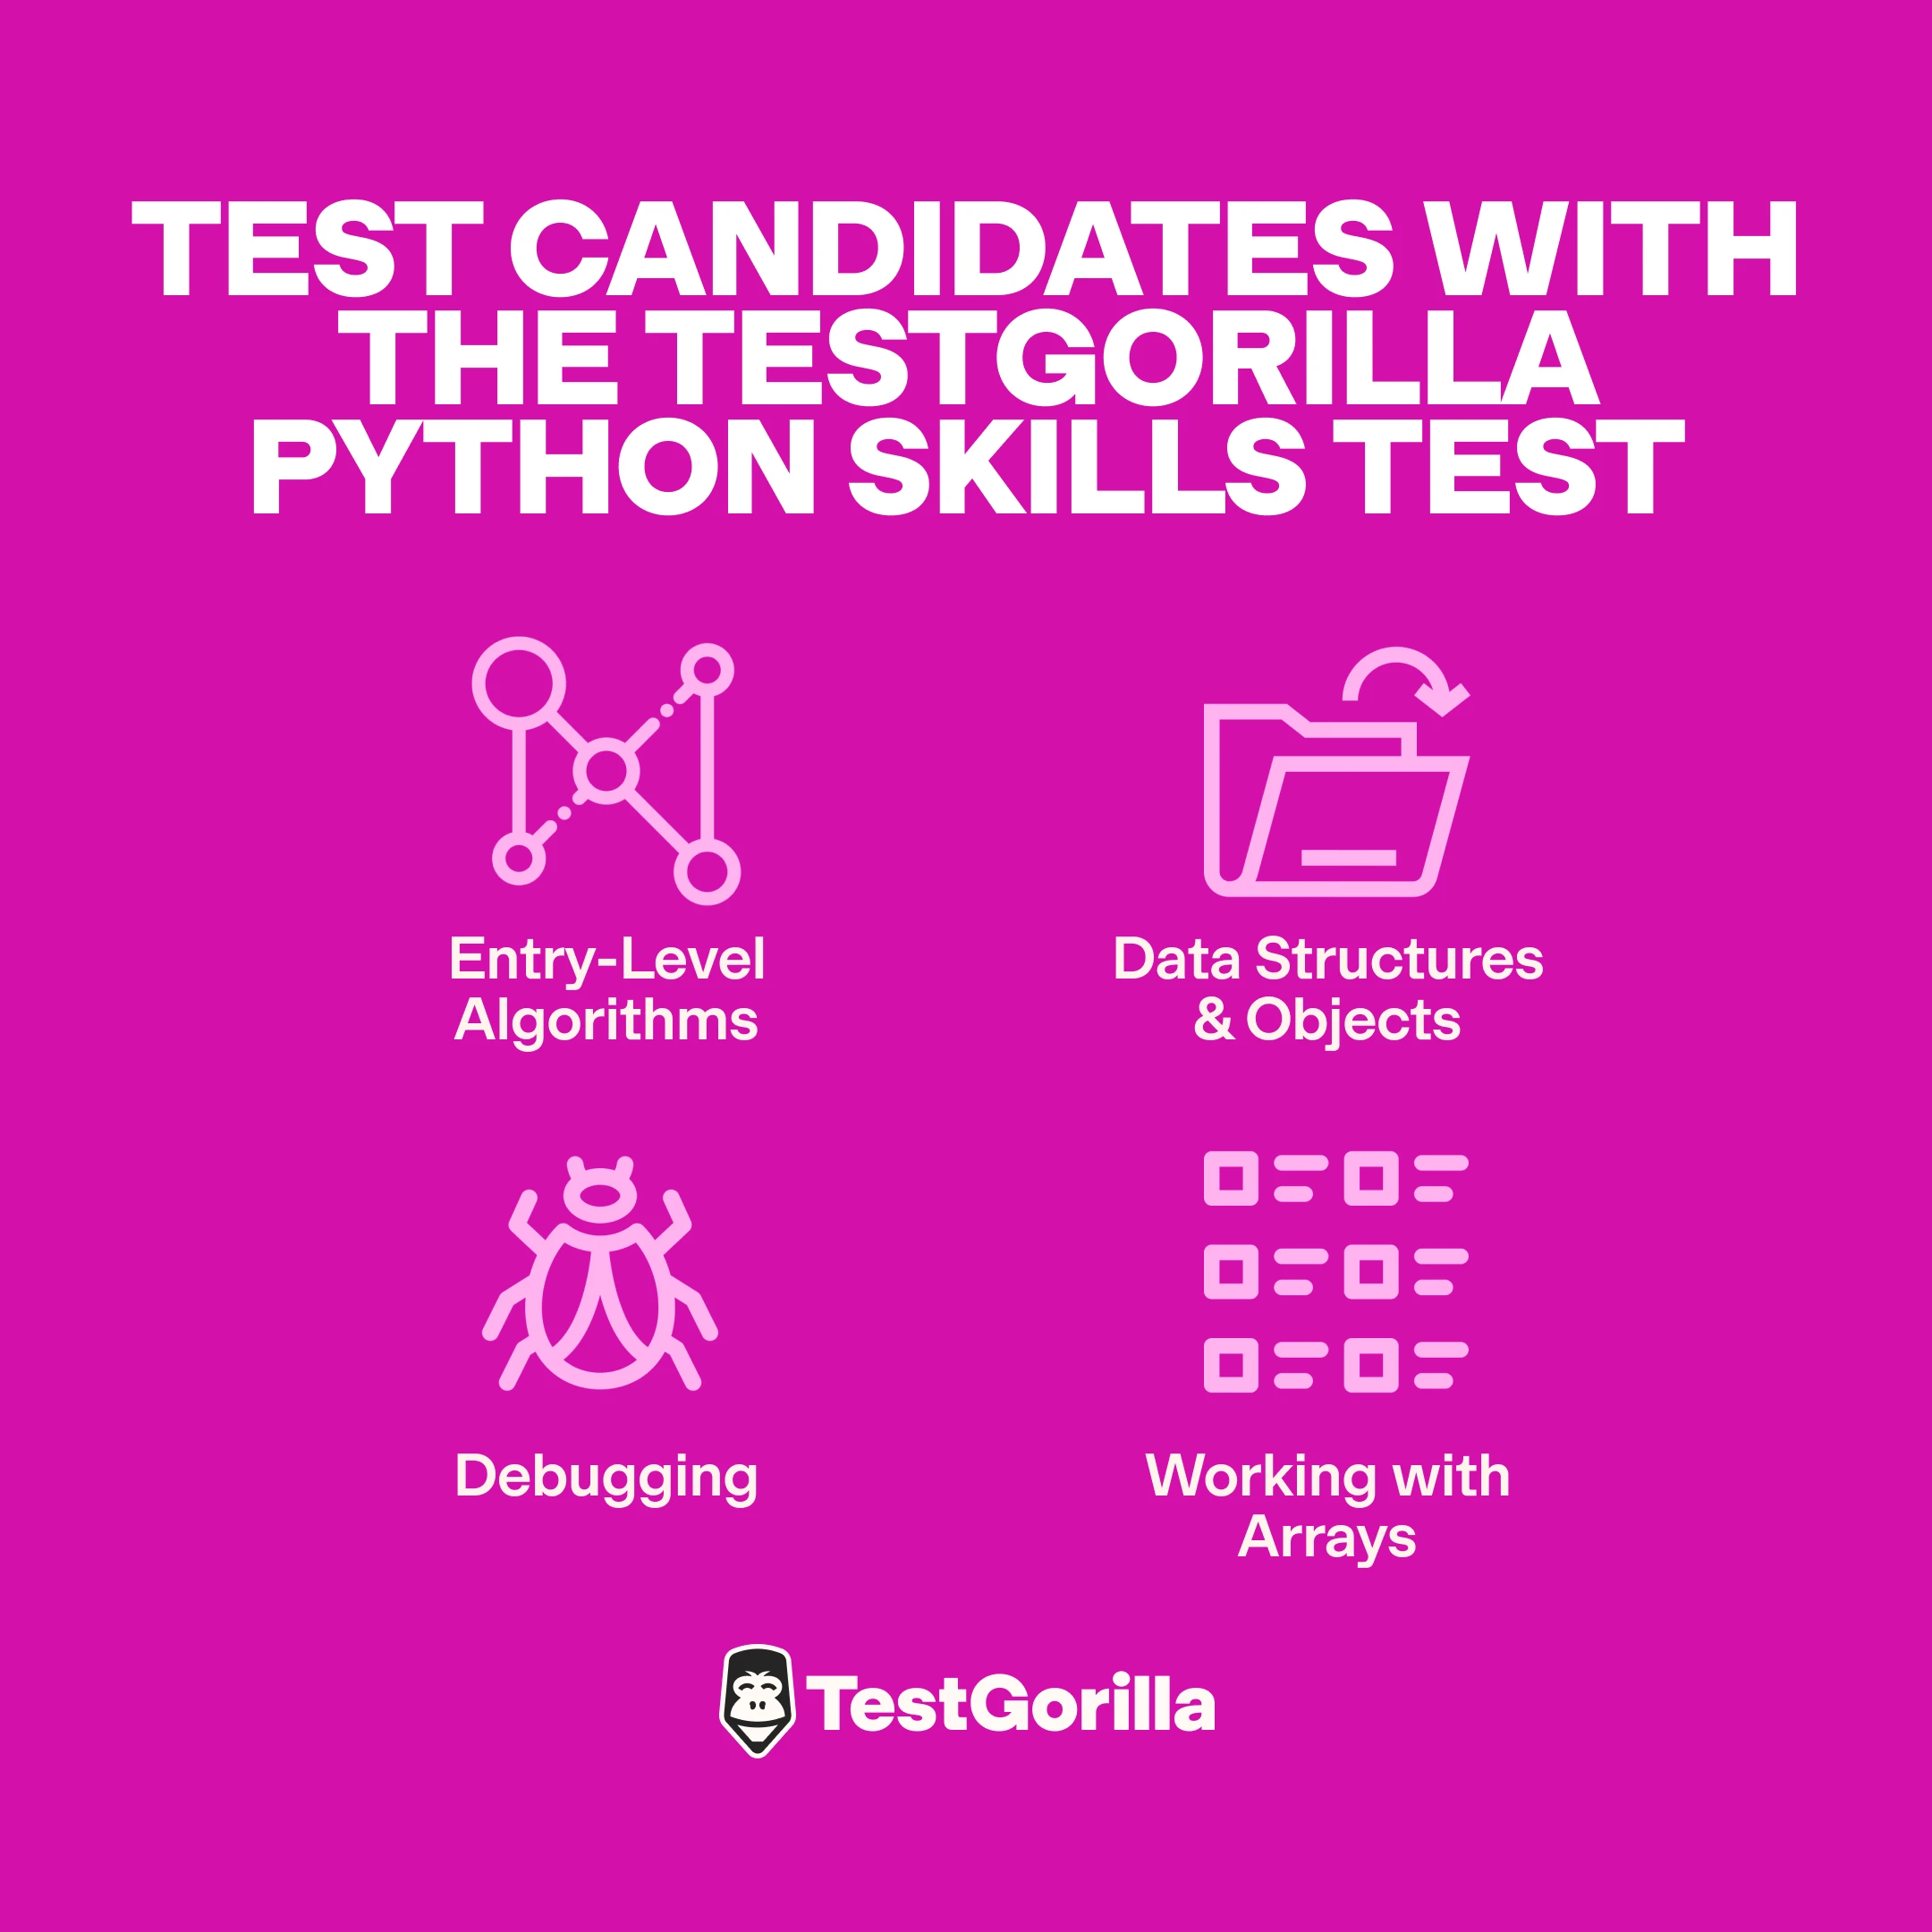 areas can you test candidates with the TestGorilla Python skills test